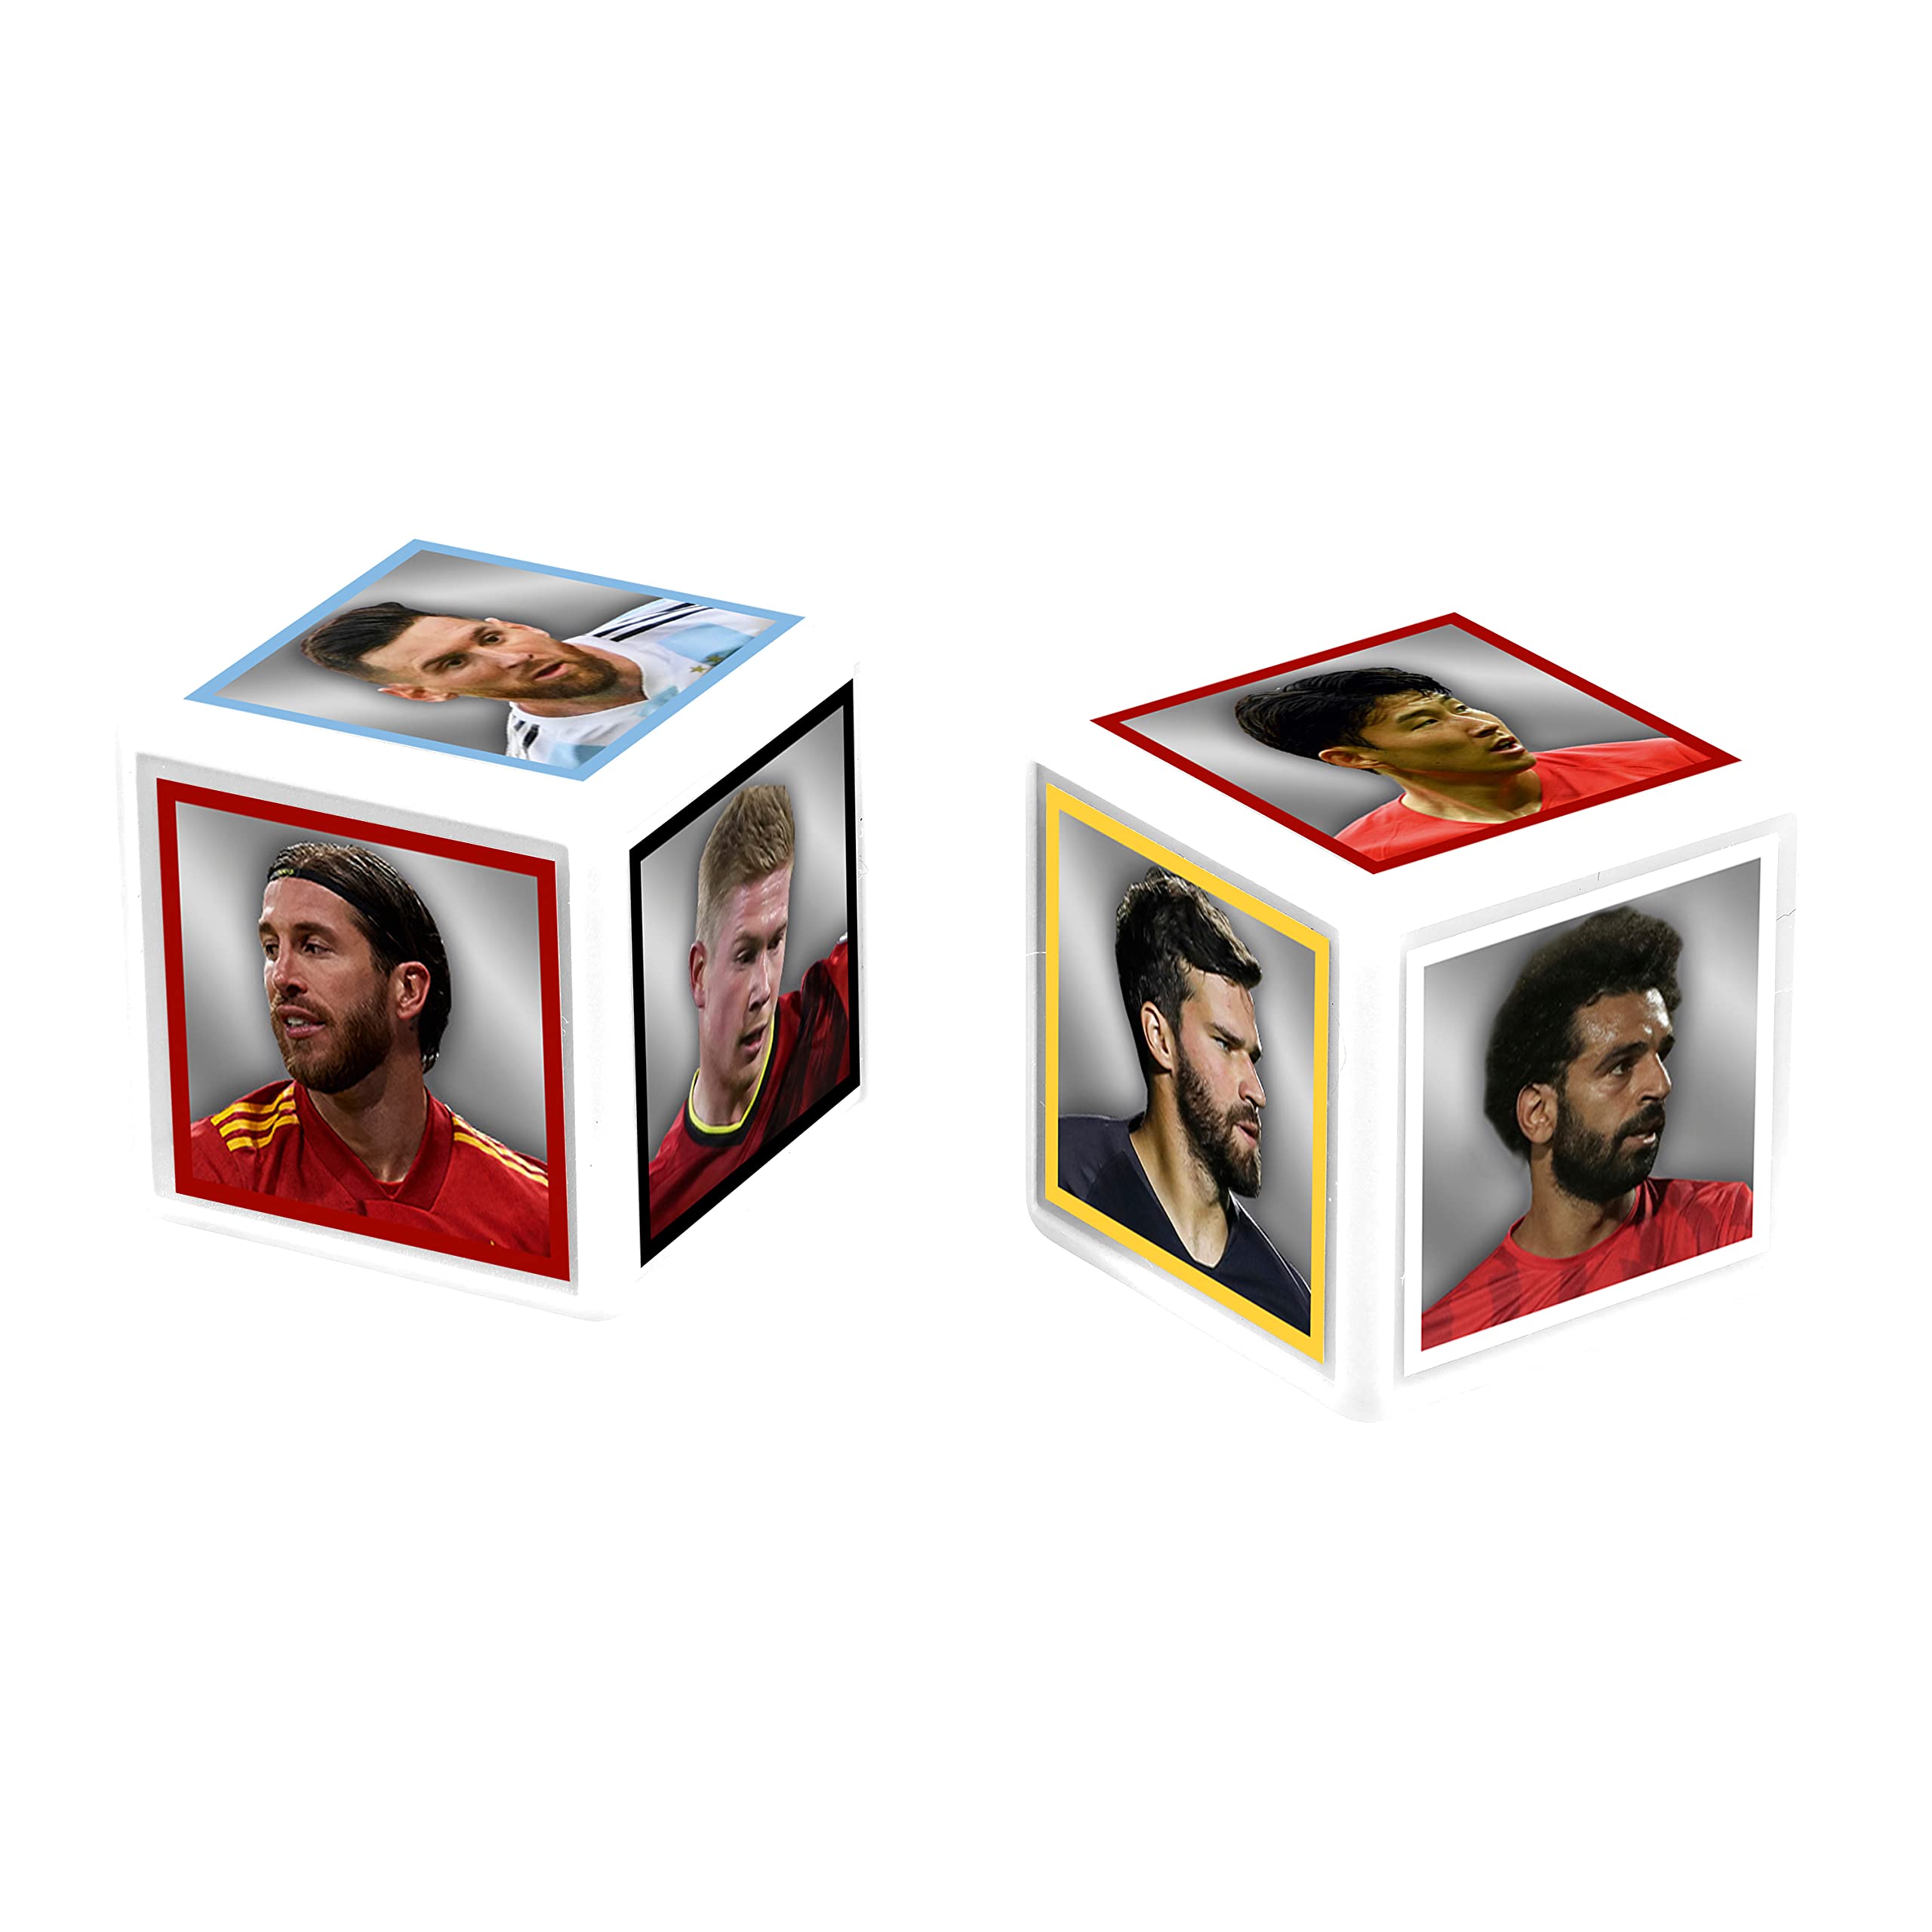 Top Trumps World Football Stars Edition Match; Entertaining Matching Cube Game with Your Favorite Soccer Athletes from Past and Present | Family Fun for Ages 6 & up